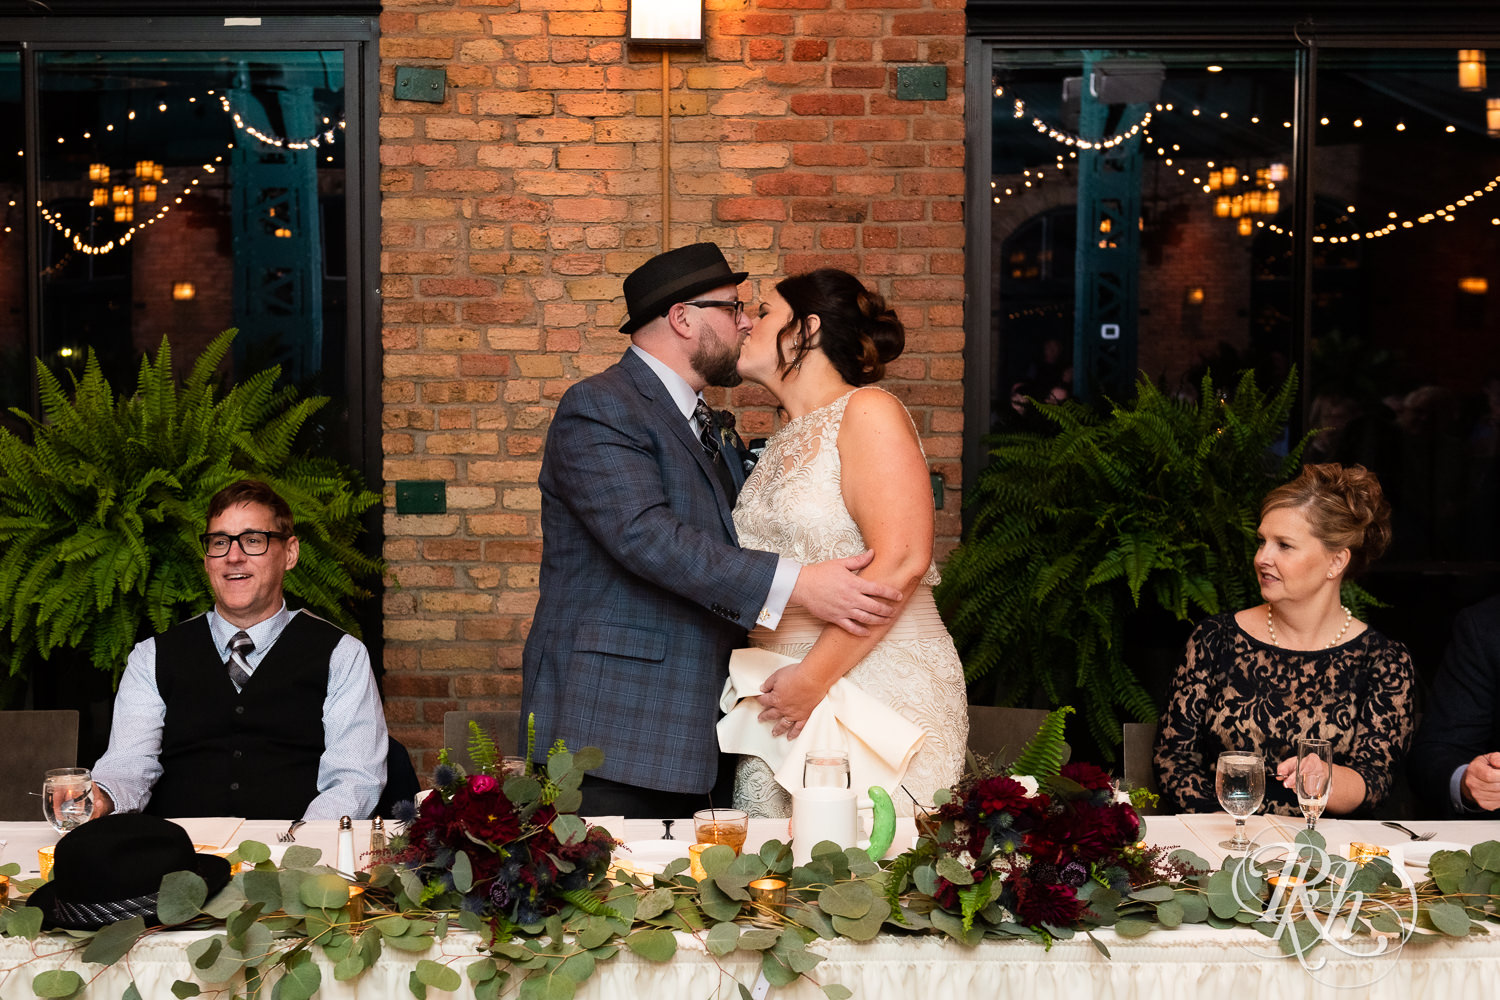 Bride and groom kiss during wedding reception at Nicollet Island Pavilion in Minneapolis, Minnesota.